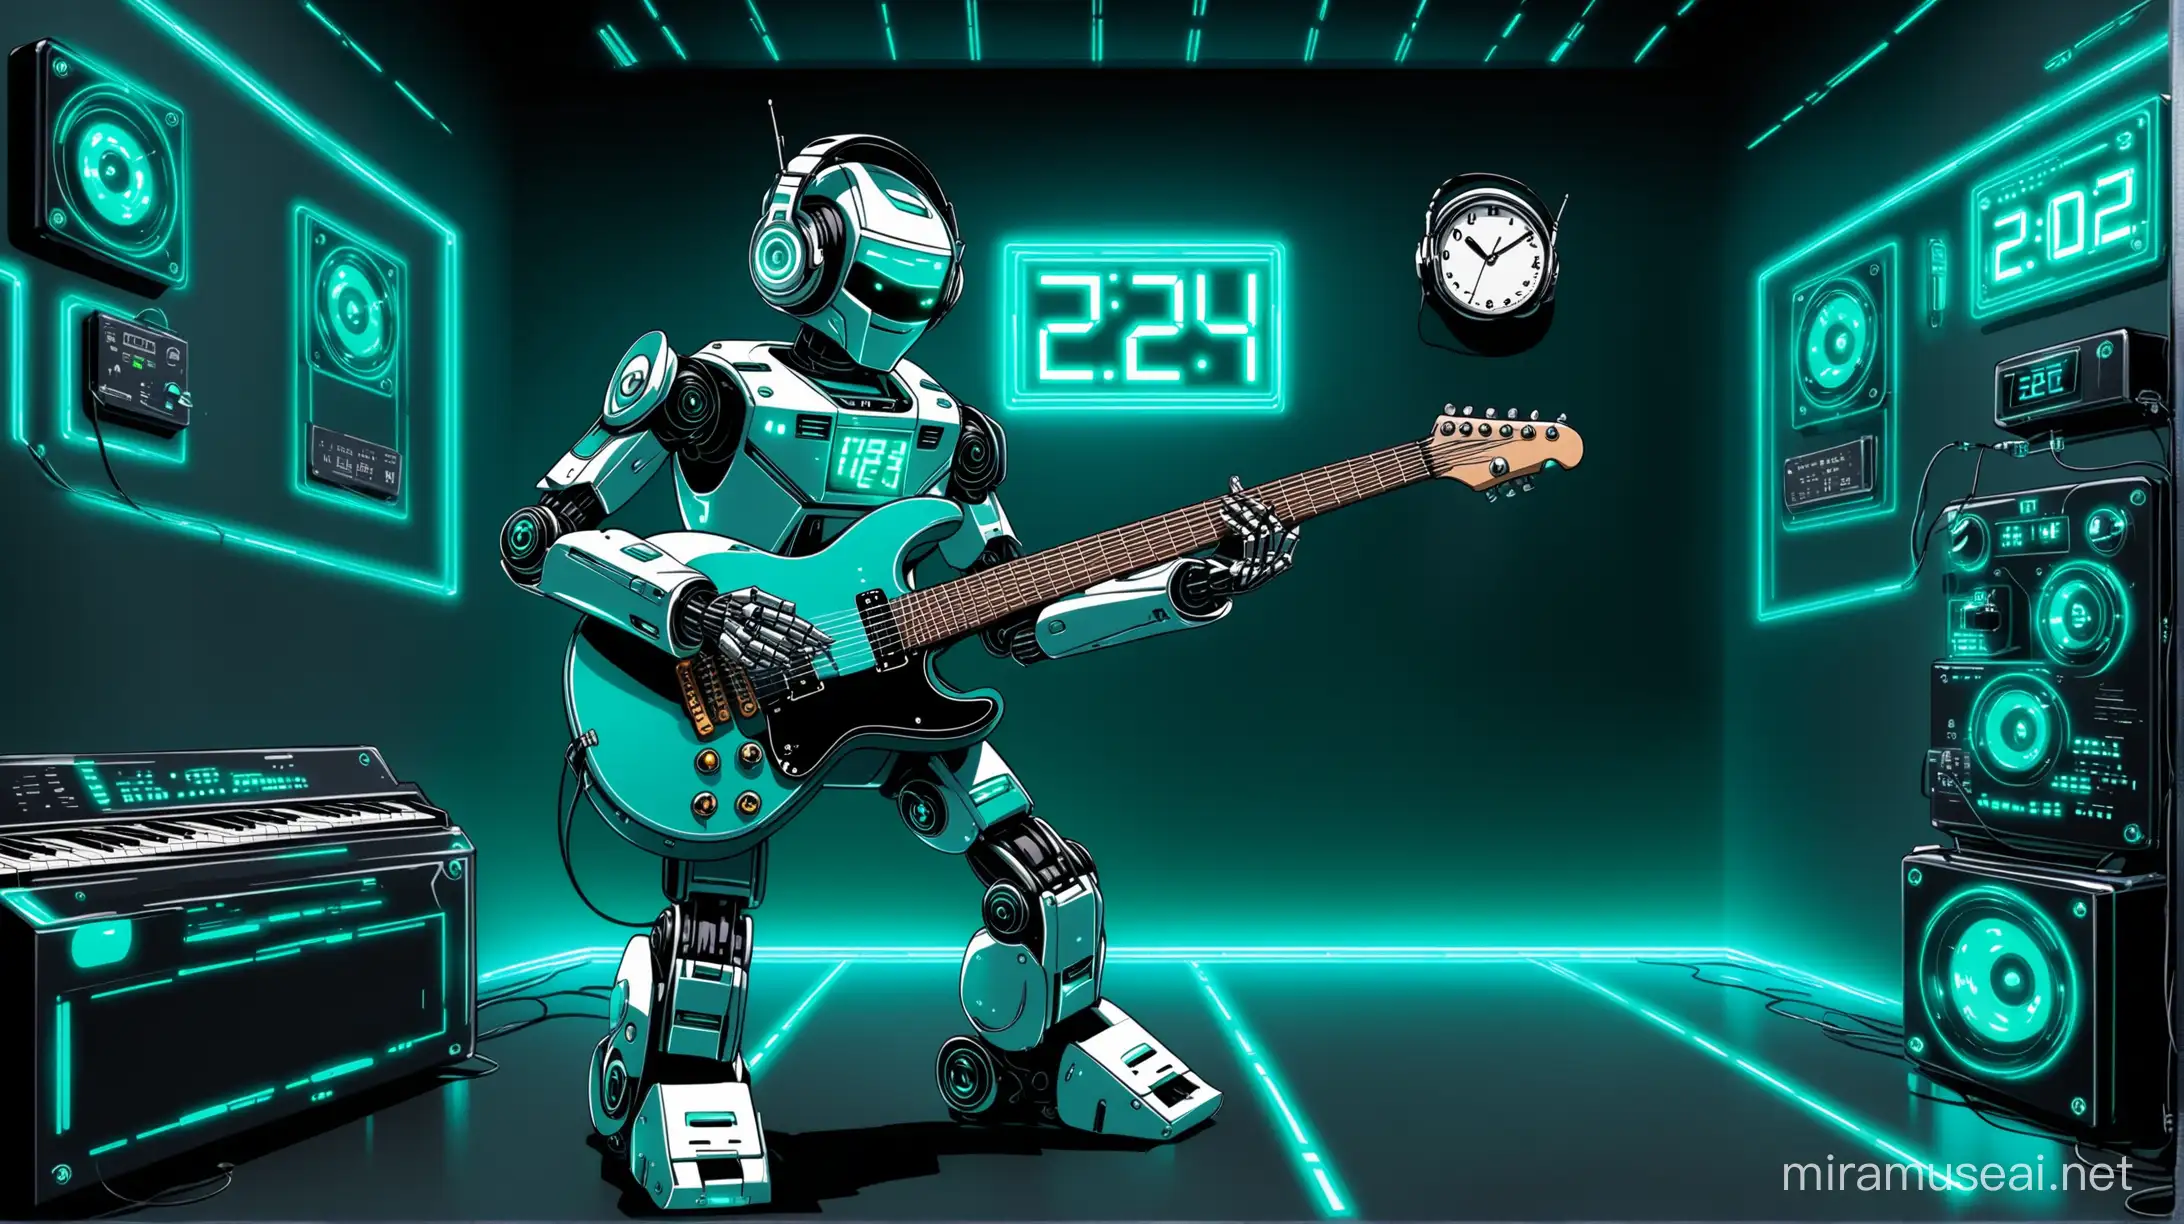 robot with headphones playing guitar. Robot playing guitar in green , blue and black room. Robot have rock n roll sign with fingers. There is futuristic digital clock showing 22h